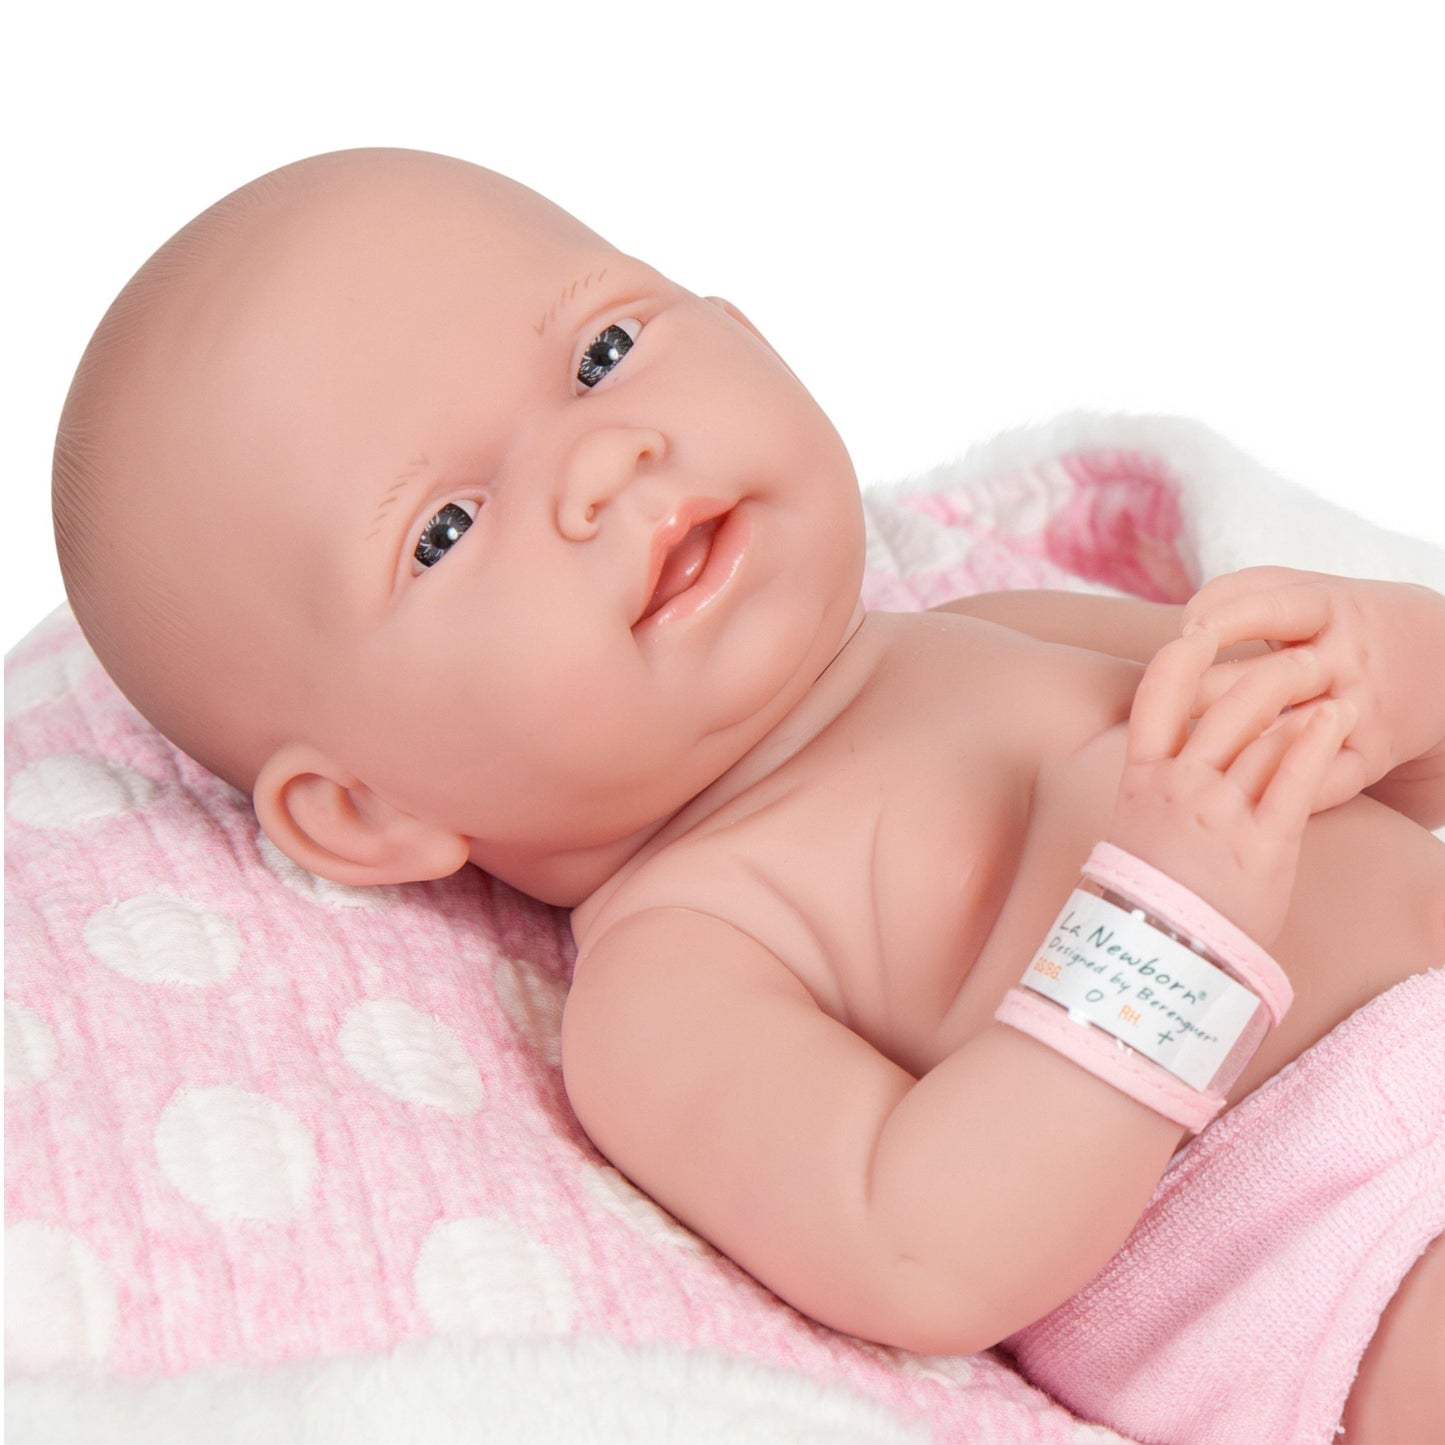 JC Toys, La Newborn AllVinyl Real Girl 15in Baby Doll-Pink with White Polka Dots - JC Toys Group Inc.